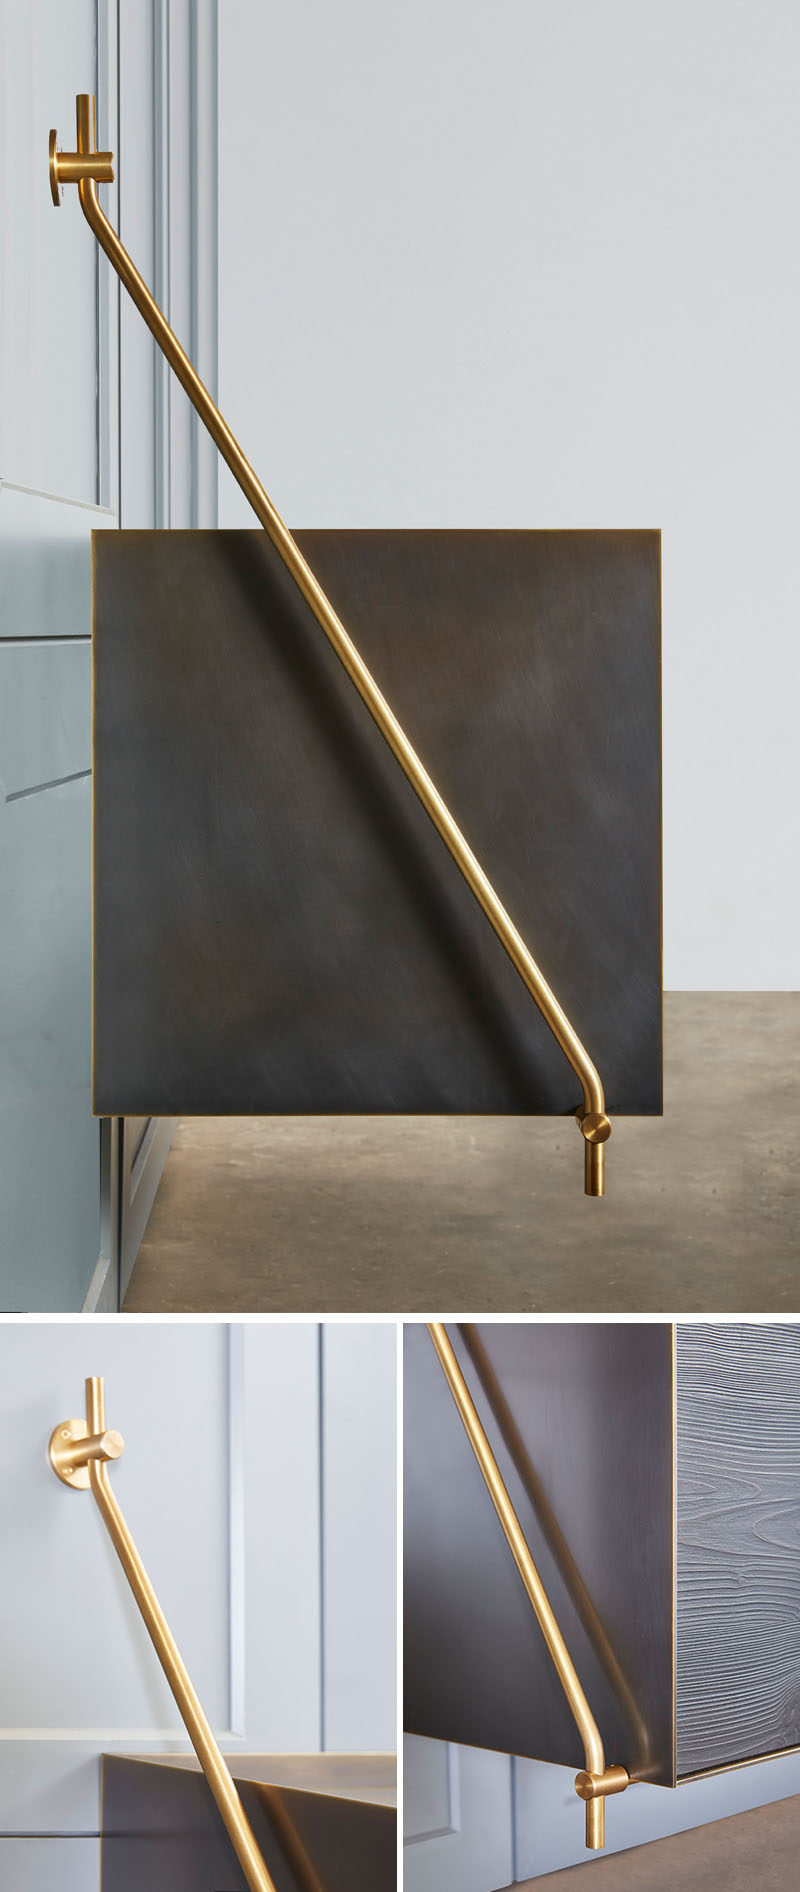 Amuneal have designed a wall hanging credenza that's made from a charred pine exterior wrapped in darkened brass with warm brass accents.